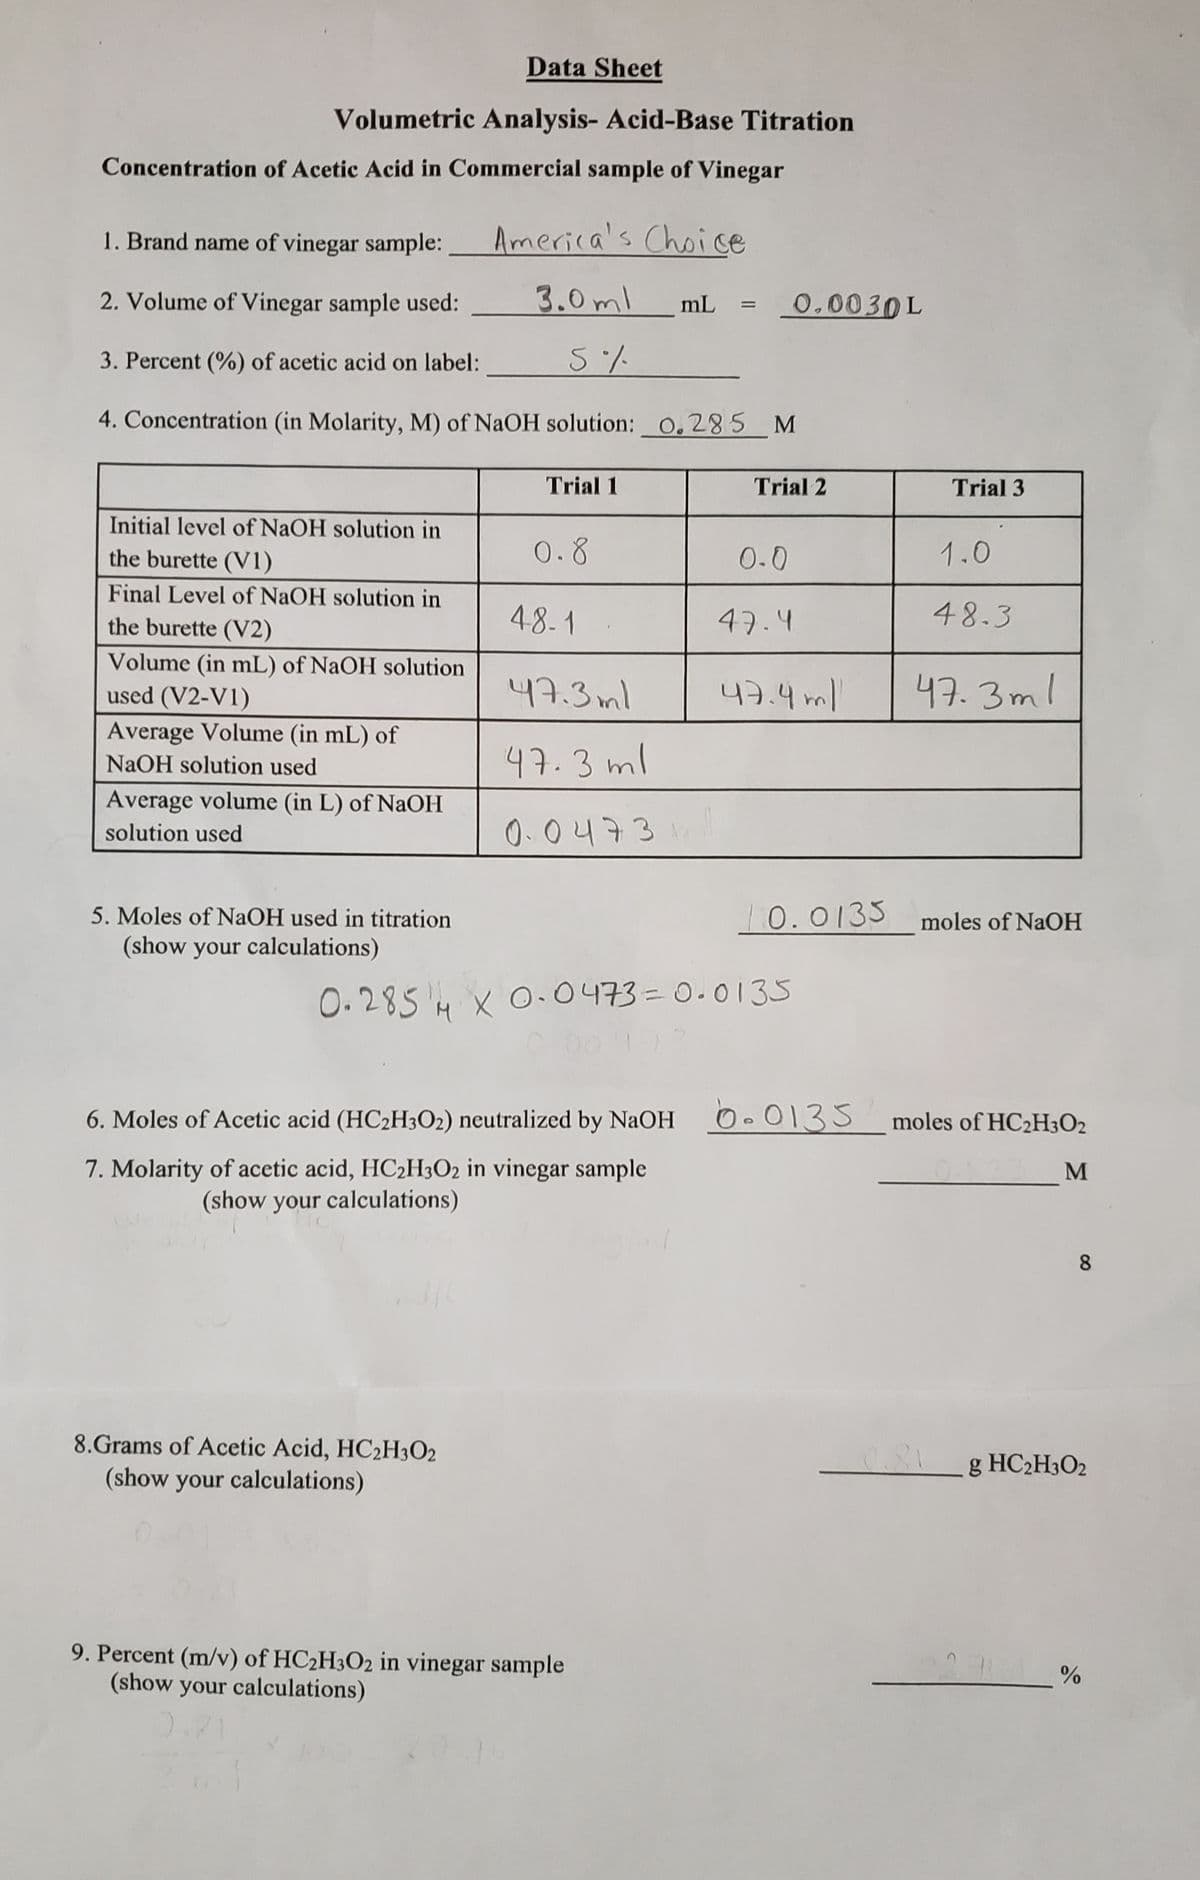 Data Sheet
Volumetric Analysis- Acid-Base Titration
Concentration of Acetic Acid in Commercial sample of Vinegar
1. Brand name of vinegar sample:
America's Choice
2. Volume of Vinegar sample used:
3.0 ml
0.0030L
mL
3. Percent (%) of acetic acid on label:
5%
4. Concentration (in Molarity, M) of NaOH solution: 0.285
Trial 1
Trial 2
Trial 3
Initial level of NaOH solution in
the burette (V1)
0.8
0.0
1.0
Final Level of NaOH solution in
the burette (V2)
48-1
47.4
48.3
Volume (in mL) of NaOH solution
used (V2-V1)
47.3ml
47.4ml
47.3ml
Average Volume (in mL) of
NaOH solution used
47.3 ml
Average volume (in L) of NaOH
solution used
0.0473
5. Moles of NAOH used in titration
10.0135
moles of NaOH
(show your calculations)
0.285 'M x O-0473=0.0135
6. Moles of Acetic acid (HC2H3O2) neutralized by NaOH O. 0135
0-0135
moles of HC2H3O2
7. Molarity of acetic acid, HC2H3O2 in vinegar sample
(show your calculations)
M
8.
8.Grams of Acetic Acid, HC2H3O2
g HC2H3O2
(show your calculations)
9. Percent (m/v) of HC2H3O2 in vinegar sample
(show your calculations)
%
0.21
